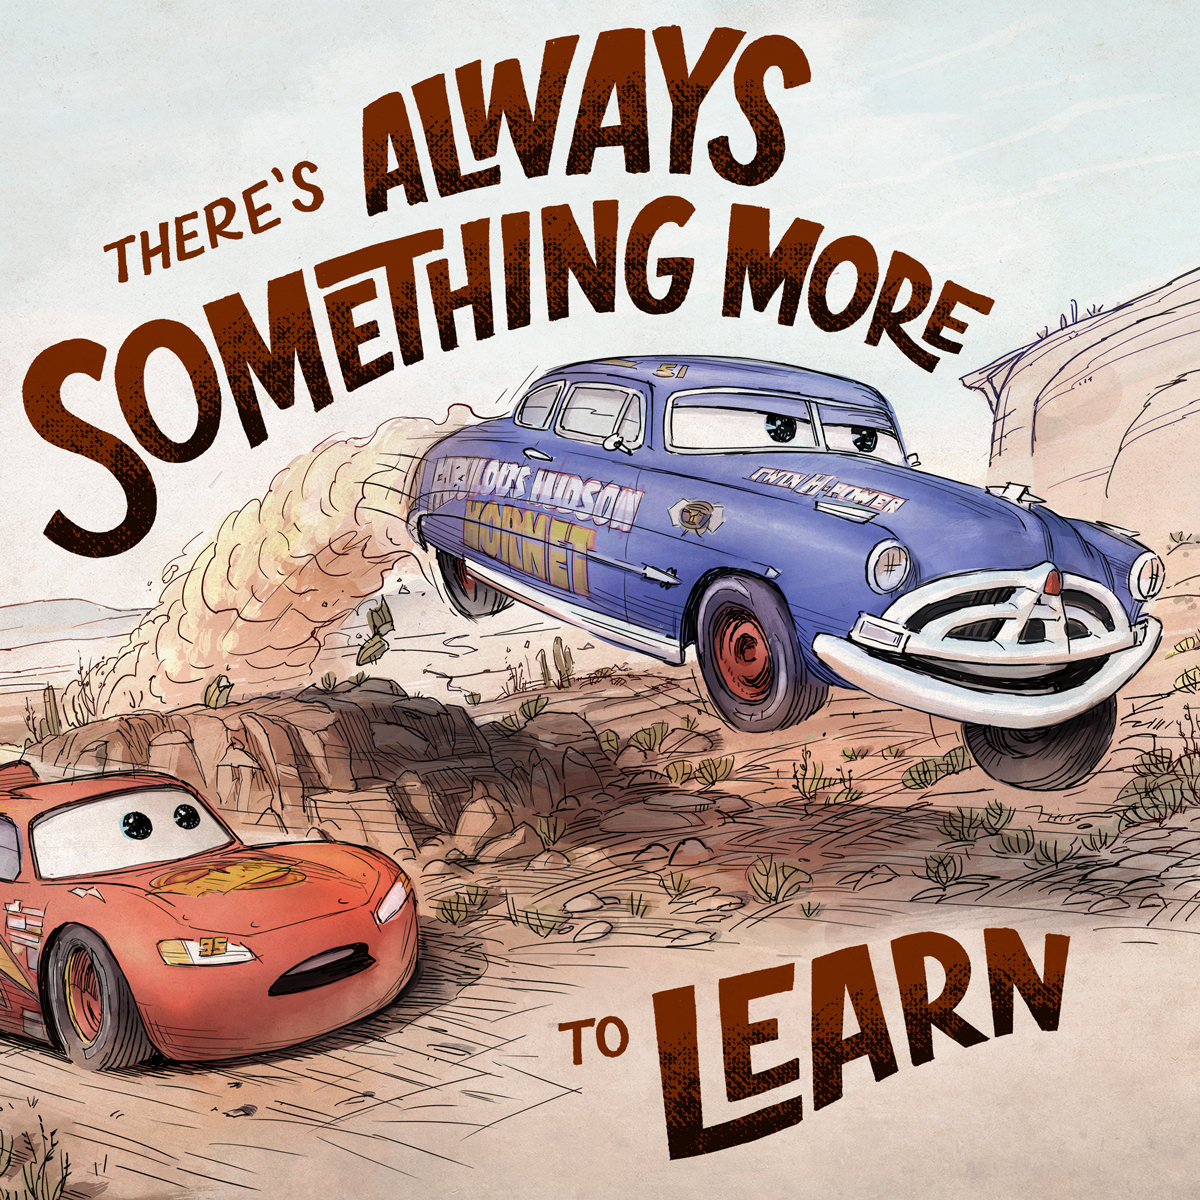 quotes_cars3_leadtheway_motivationmonday_moretolearn